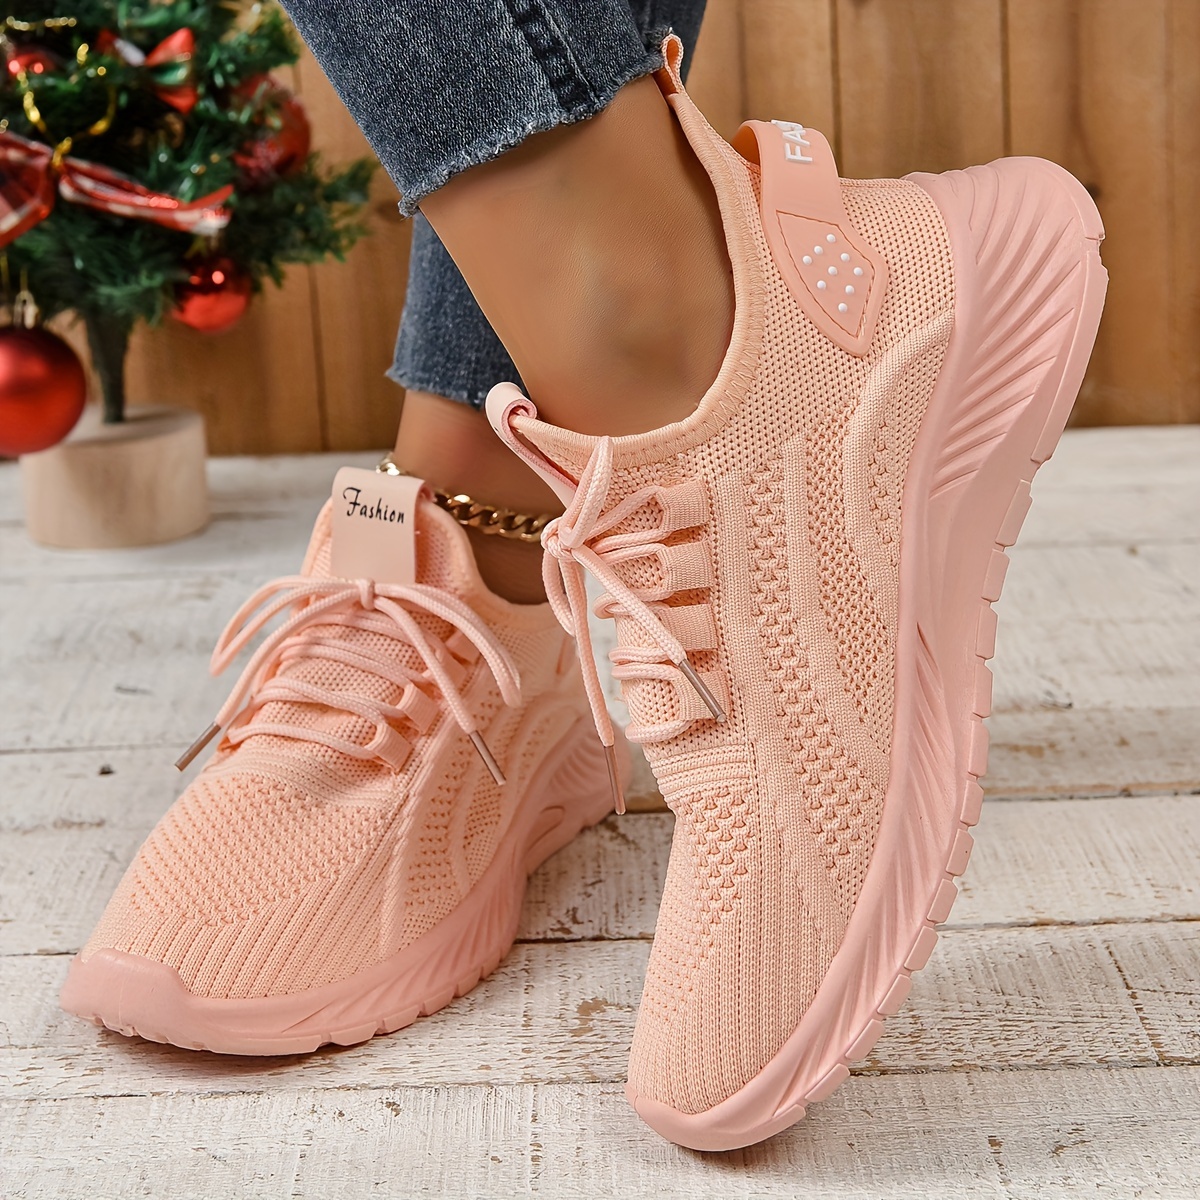 Women's Knitted Sports Shoes, Breathable & Comfortable Low Top Running  Shoes, Casual Tennis Gym Shoes